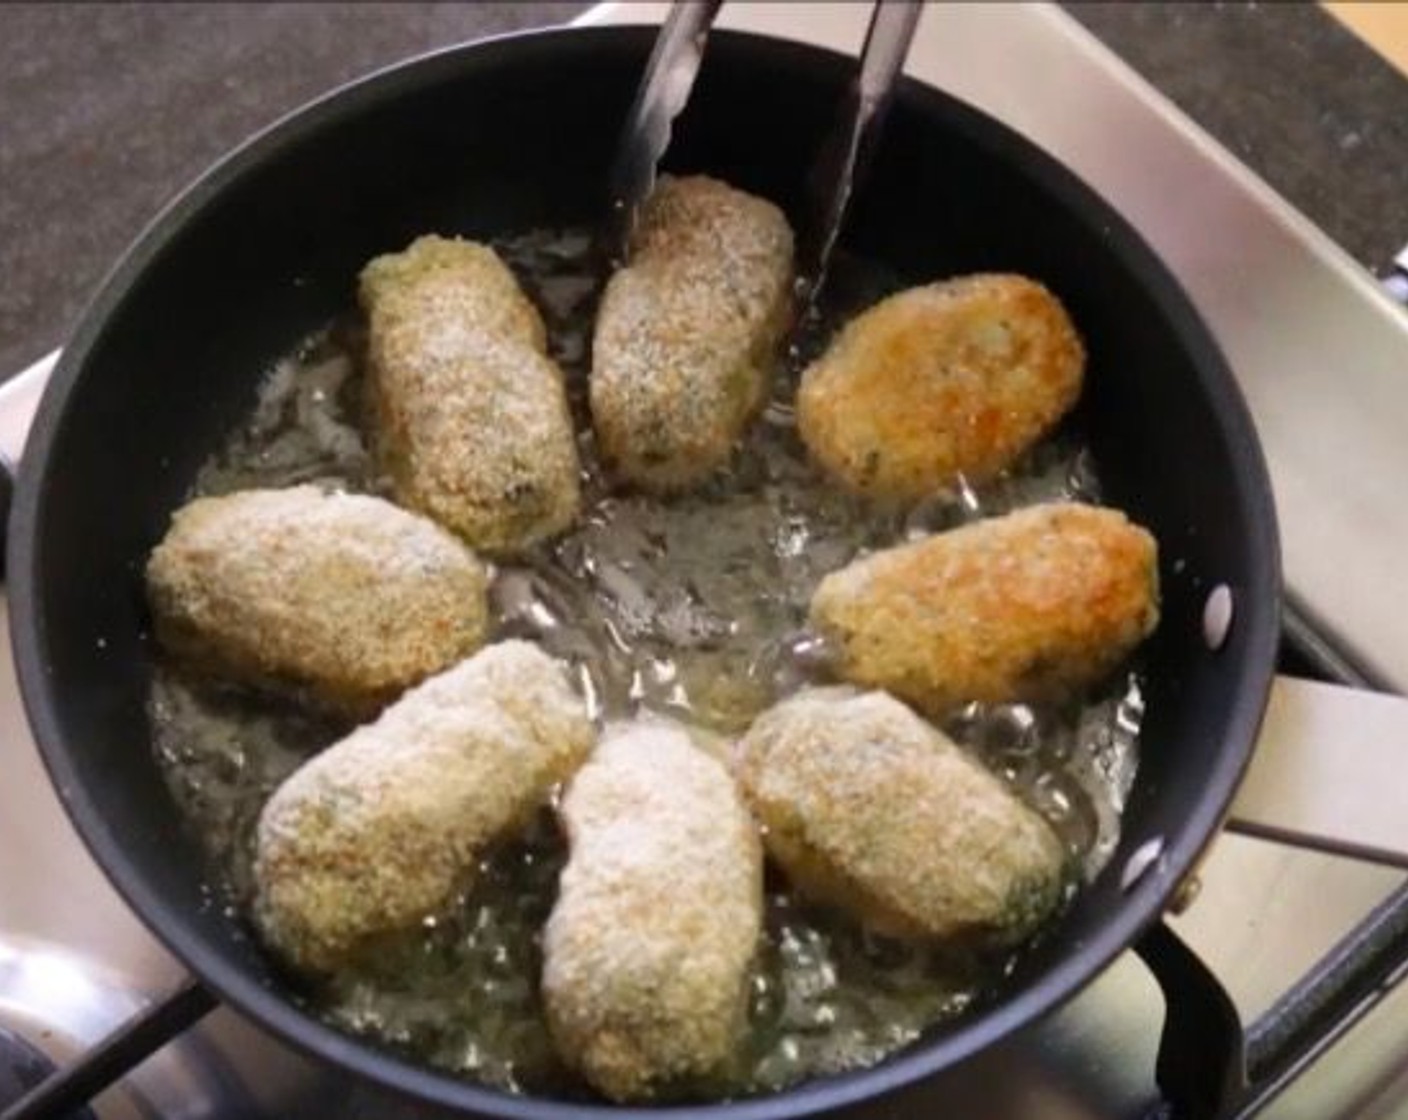 step 12 Heat a small frying pan over a medium-high heat and add Sunflower Oil (1/3 cup). Once the oil gets hot, add the croquettes into the pan and fry for 60-75 seconds on each side. Transfer to a dish with paper towels as finished.